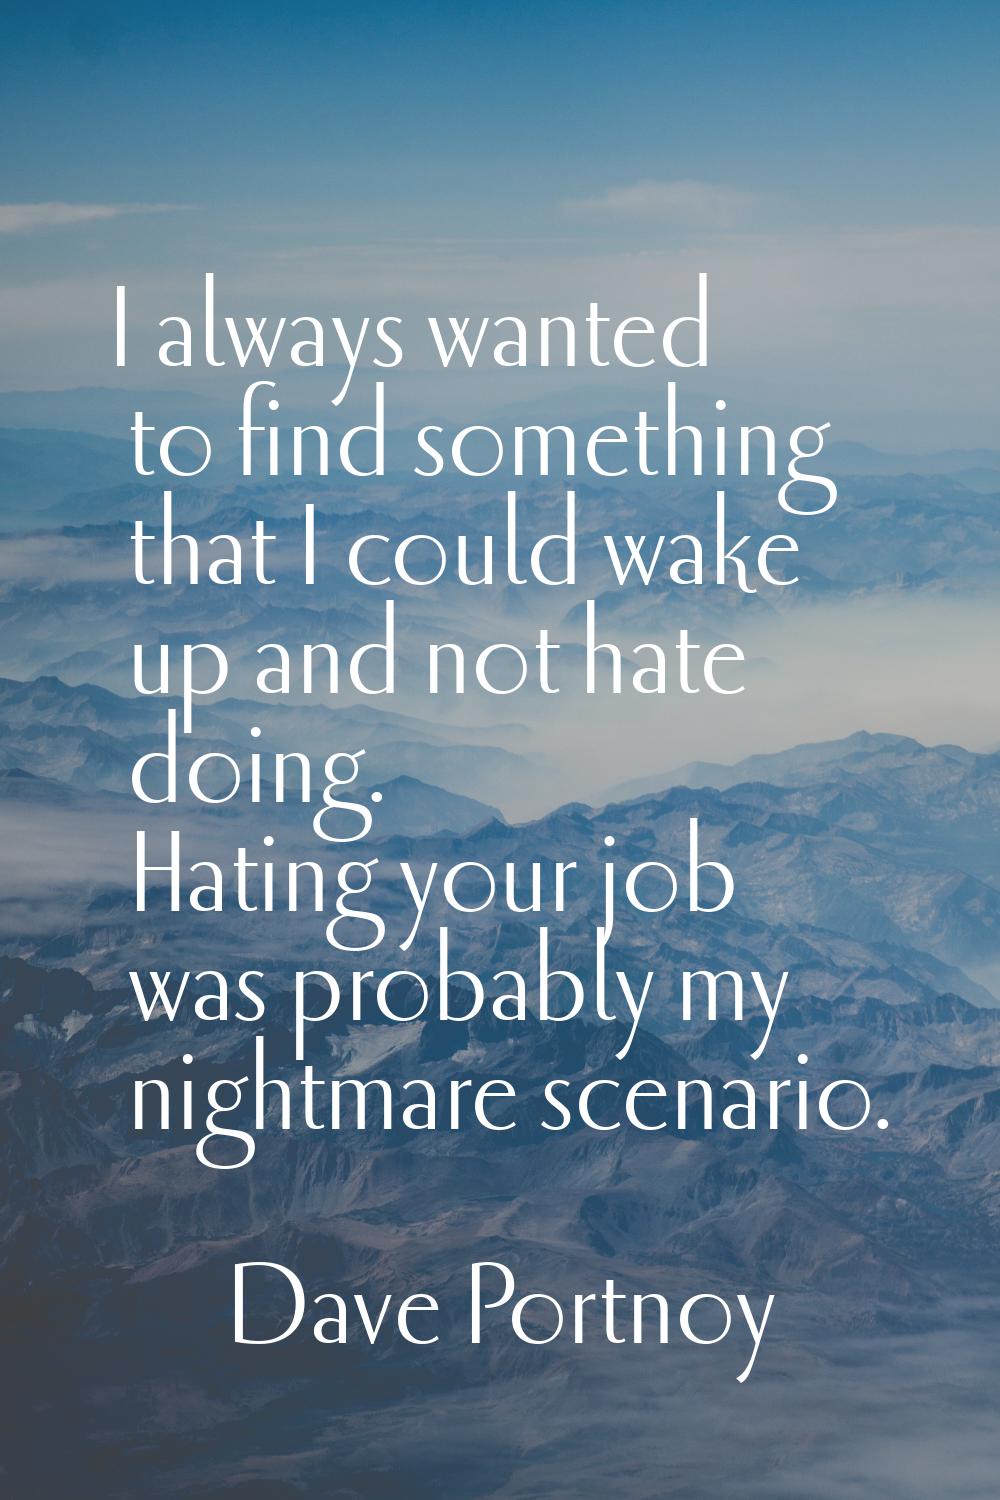 I always wanted to find something that I could wake up and not hate doing. Hating your job was prob